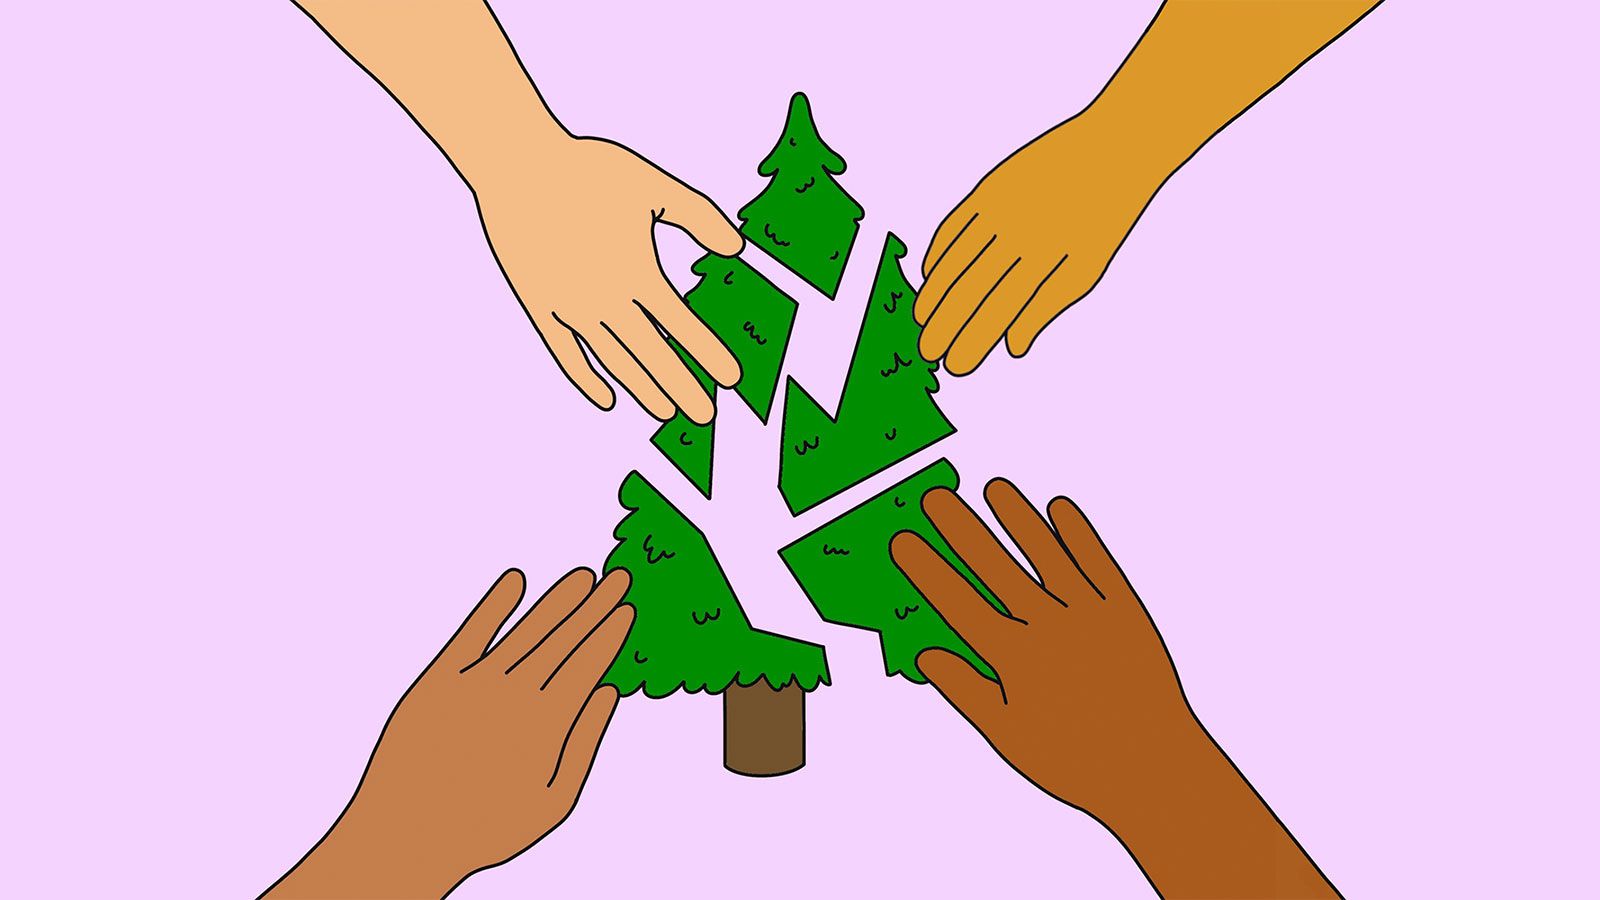 Illustration of four hands piecing together a tree, like a puzzle